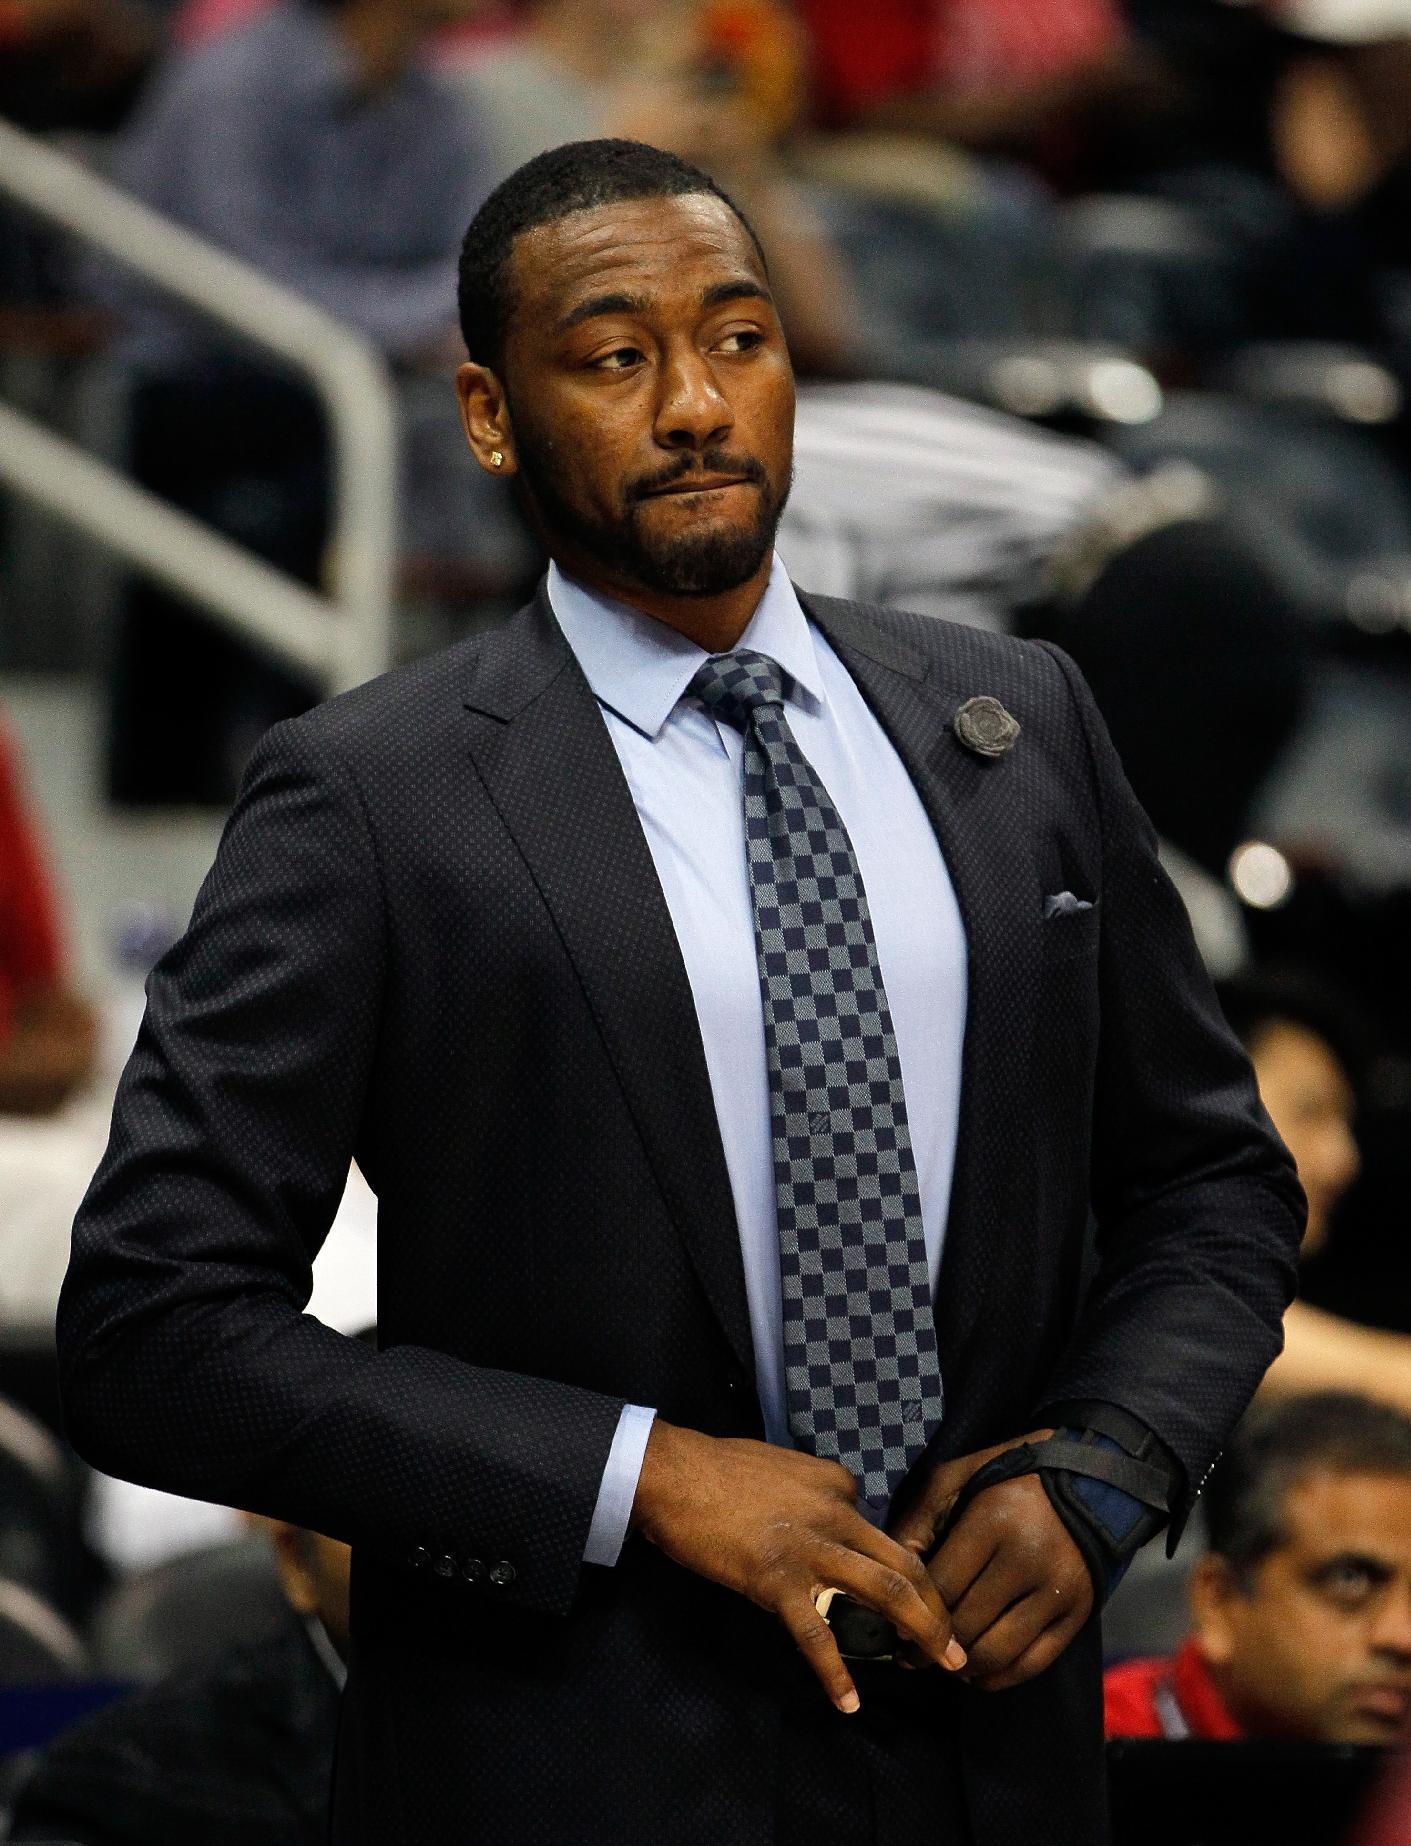 ATLANTA, GA - MAY 05: John Wall #2 of the Washington Wizards looks on during warmups prior to Game Two of the Eastern Conference Semifinals of the 2015 NBA Playoffs against the Atlanta Hawks at Philips Arena on May 5, 2015 in Atlanta, Georgia. (Photo by Kevin C. Cox/Getty Images)